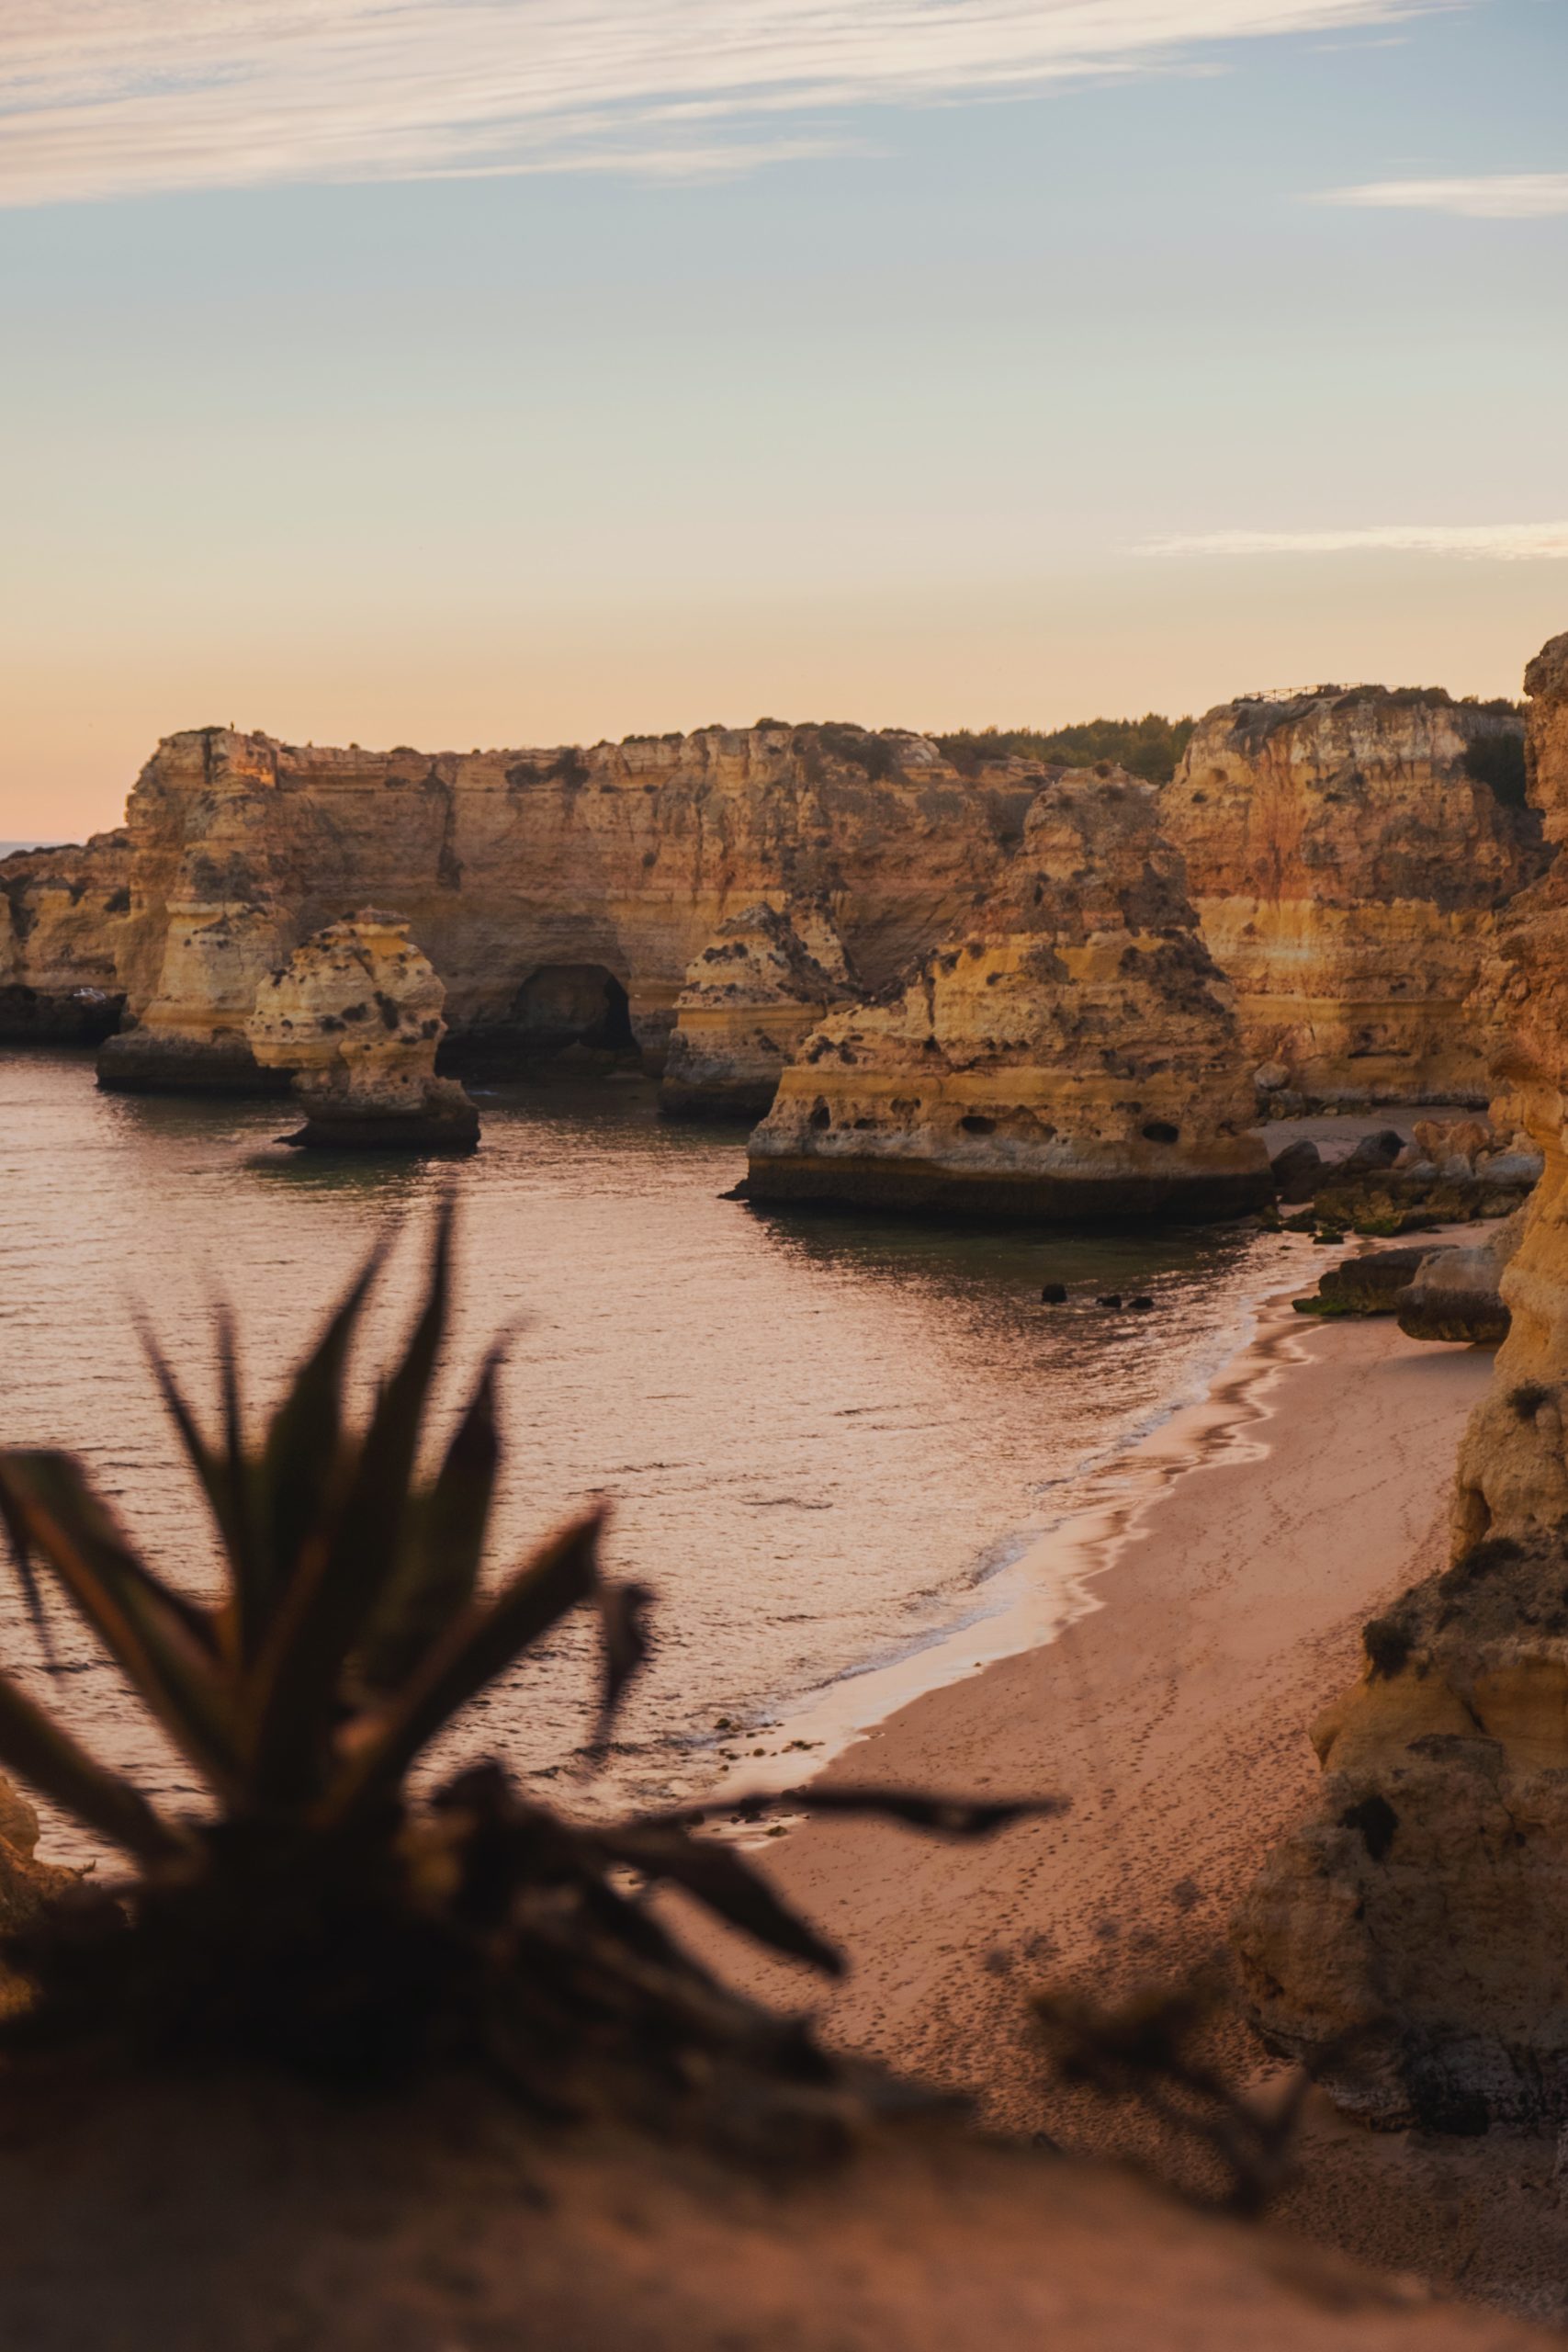 Portugal's stunning Algarve region has one of the best beaches in Europe